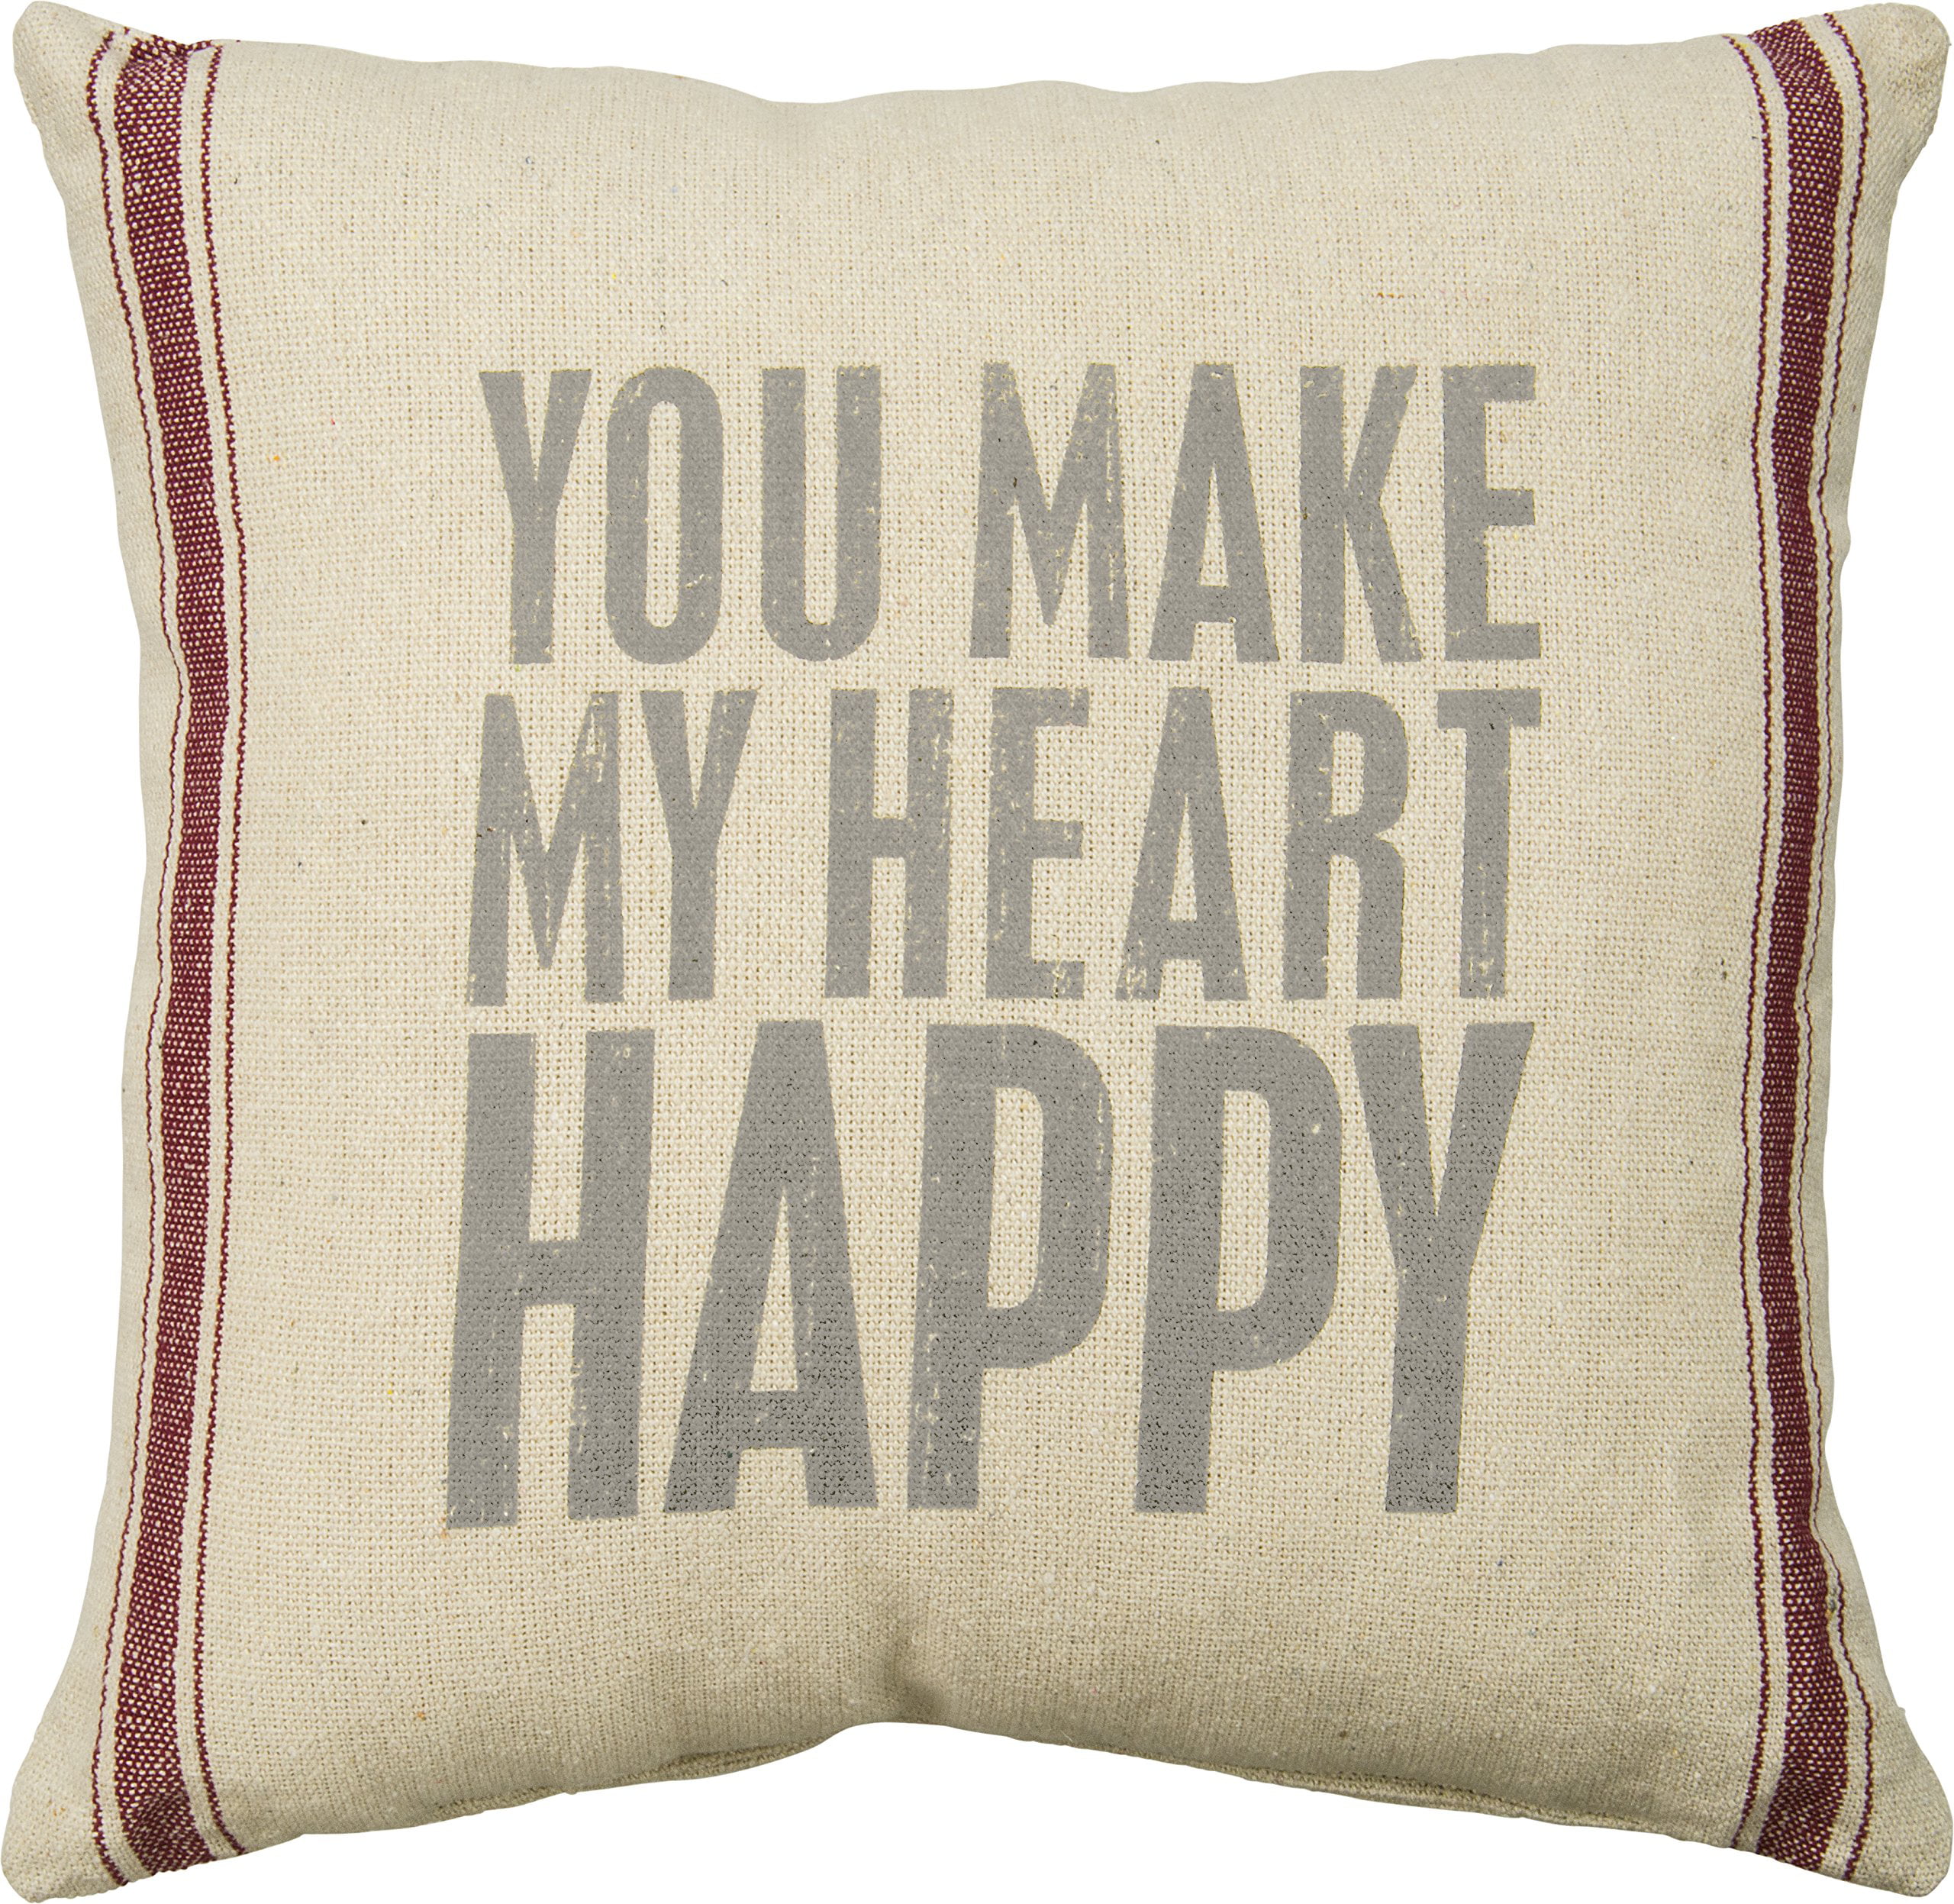 10-Inch Square Primitives by Kathy Double-Sided Be Happy Throw Pillow Cream